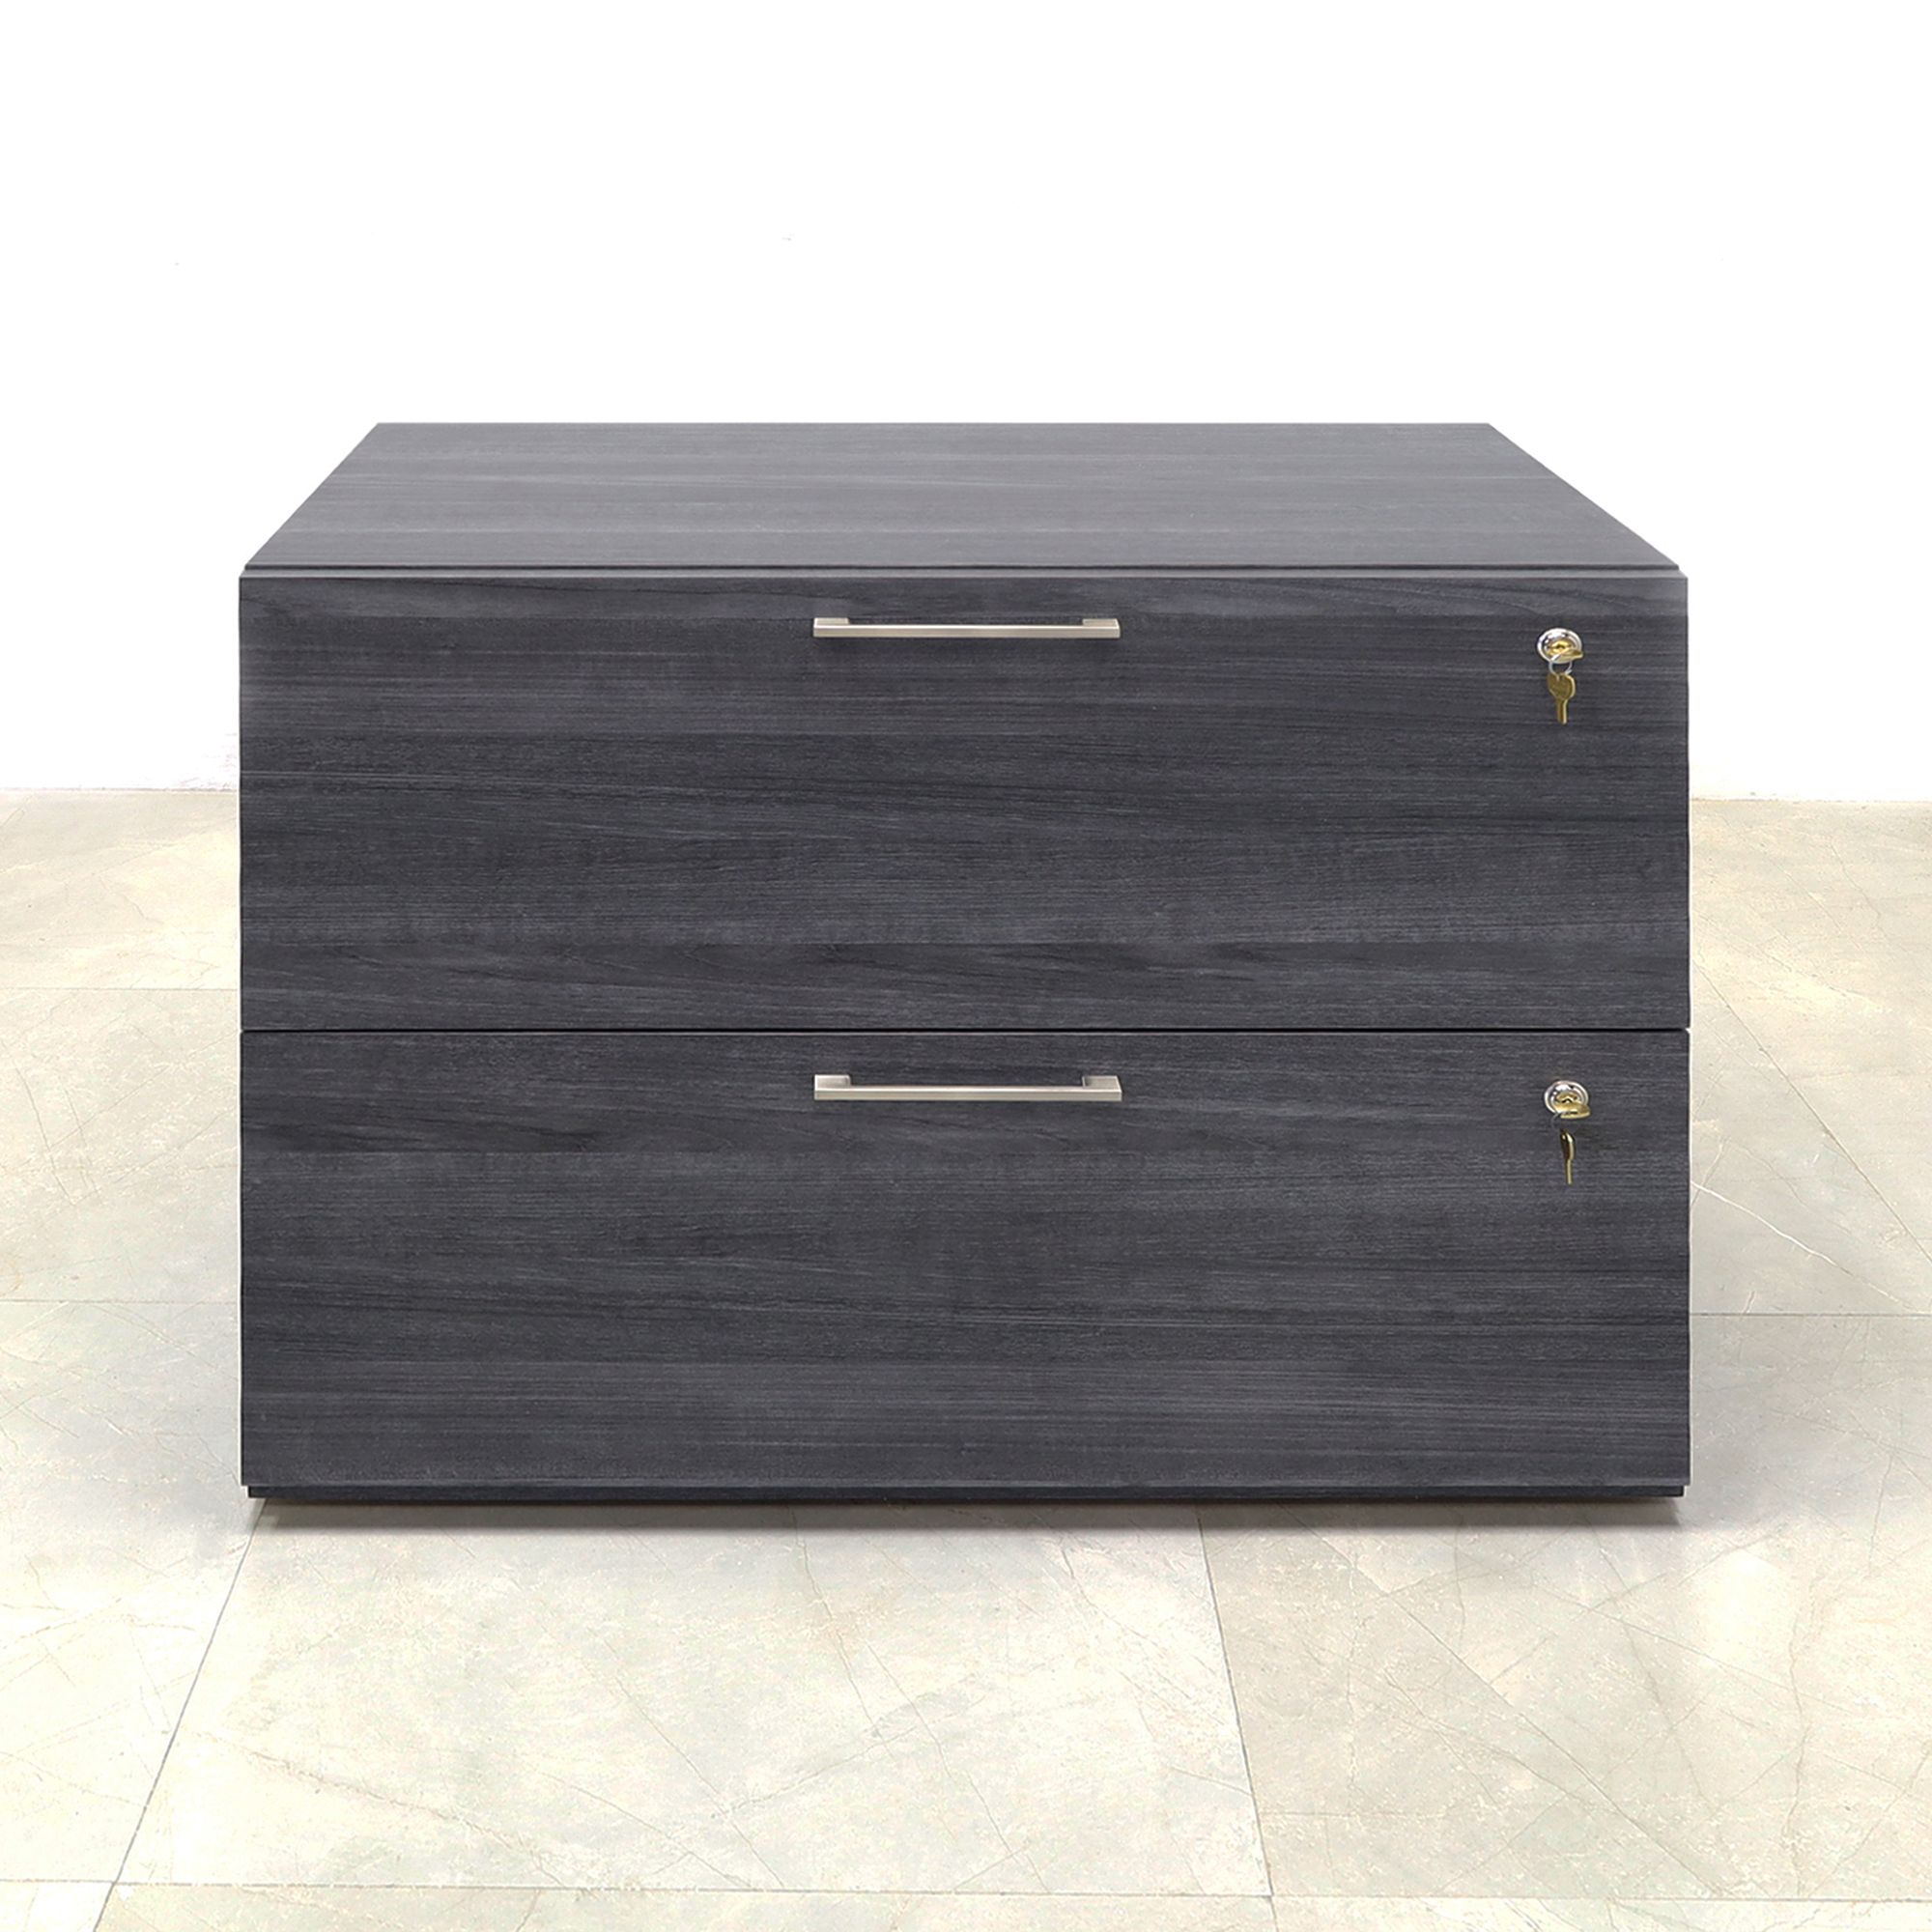 Naples Lateral File Cabinet in storm teakwood laminate, shown here.